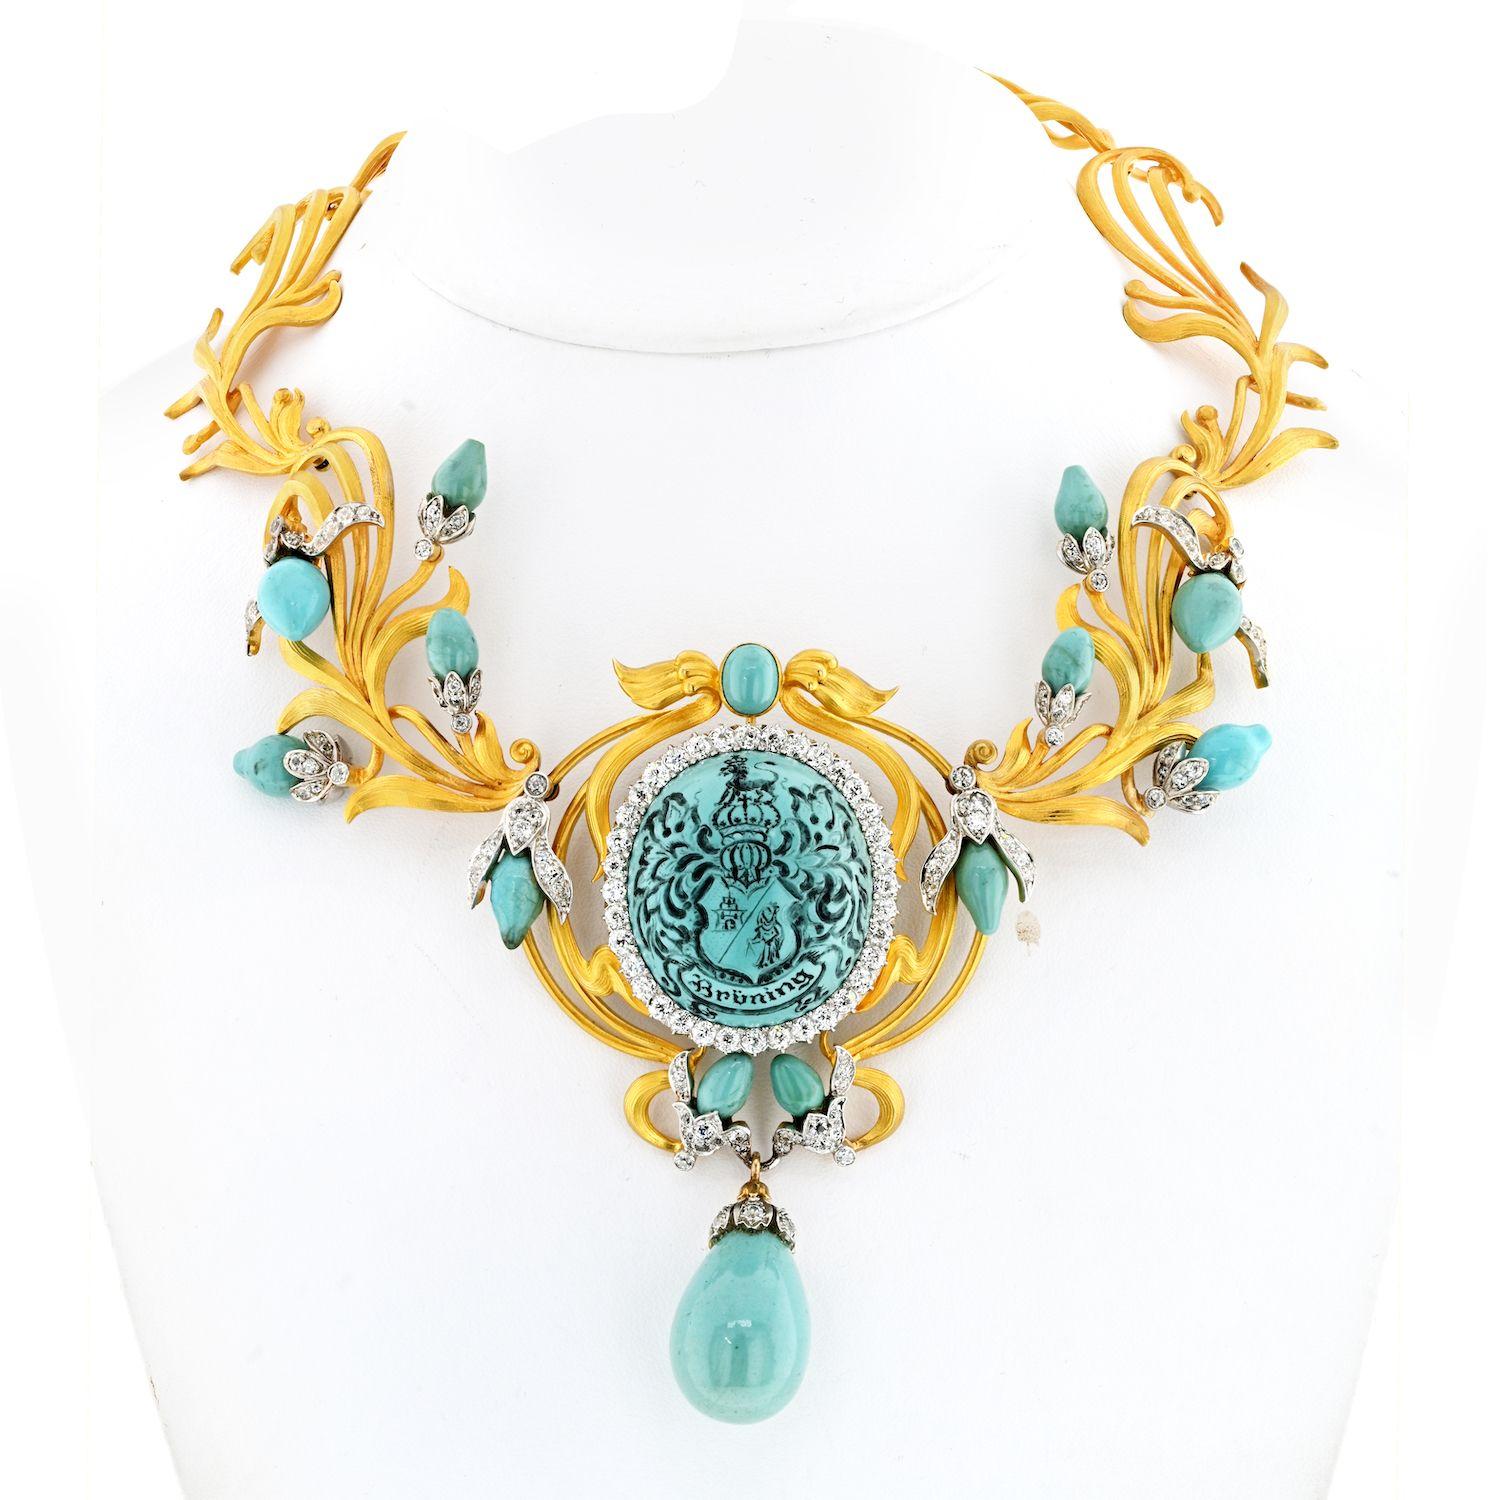 The 18K Yellow Gold Persian Turquoise Antique Diamond Necklace is a stunning piece of jewelry that exudes elegance and sophistication. The necklace is crafted from 18-karat yellow gold, giving it a beautiful warm tone and contrasting turquoise along